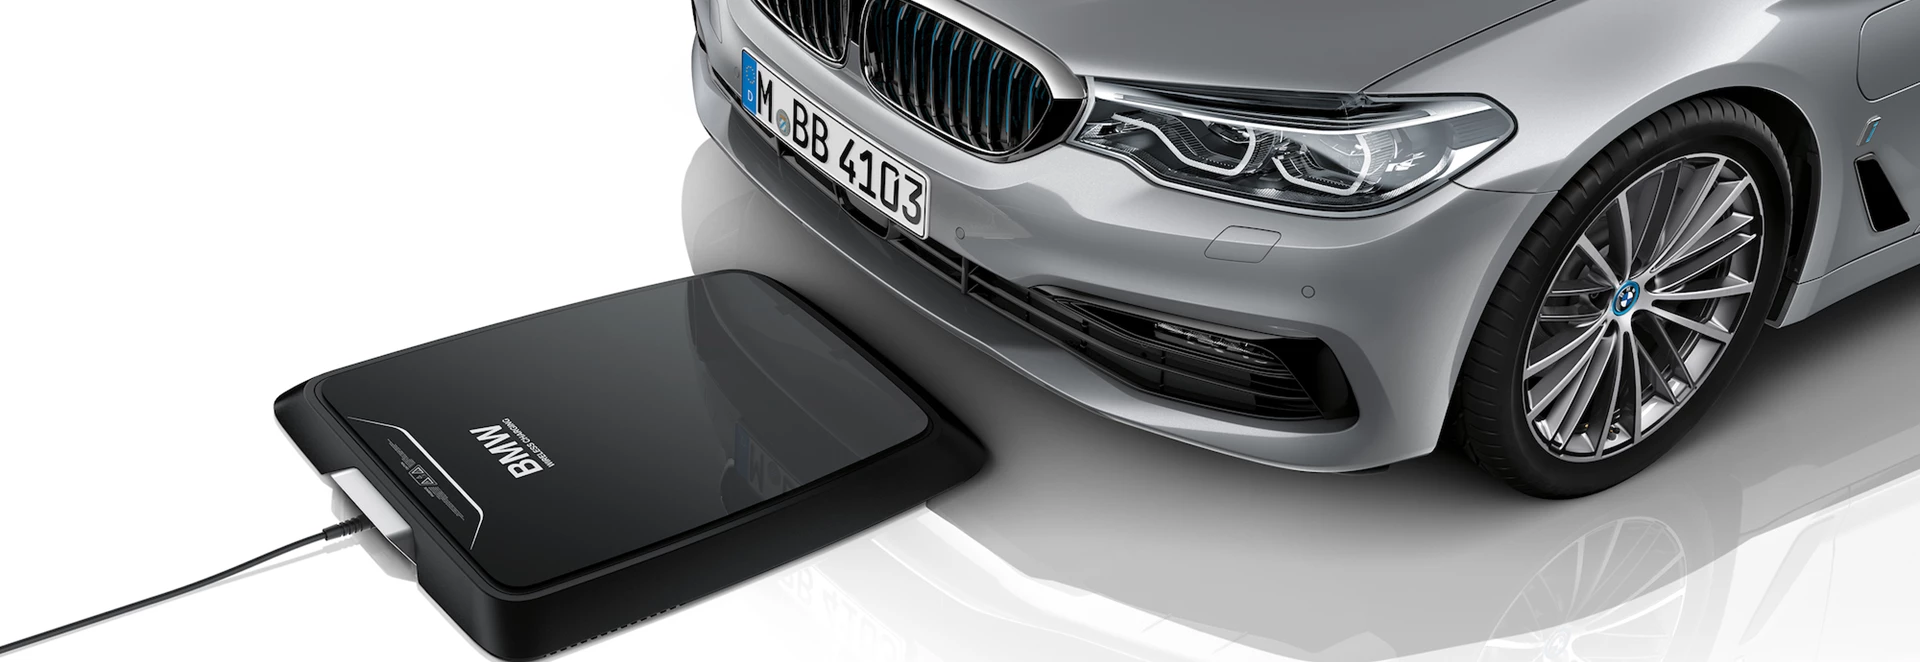 BMW launches Wireless Charging product